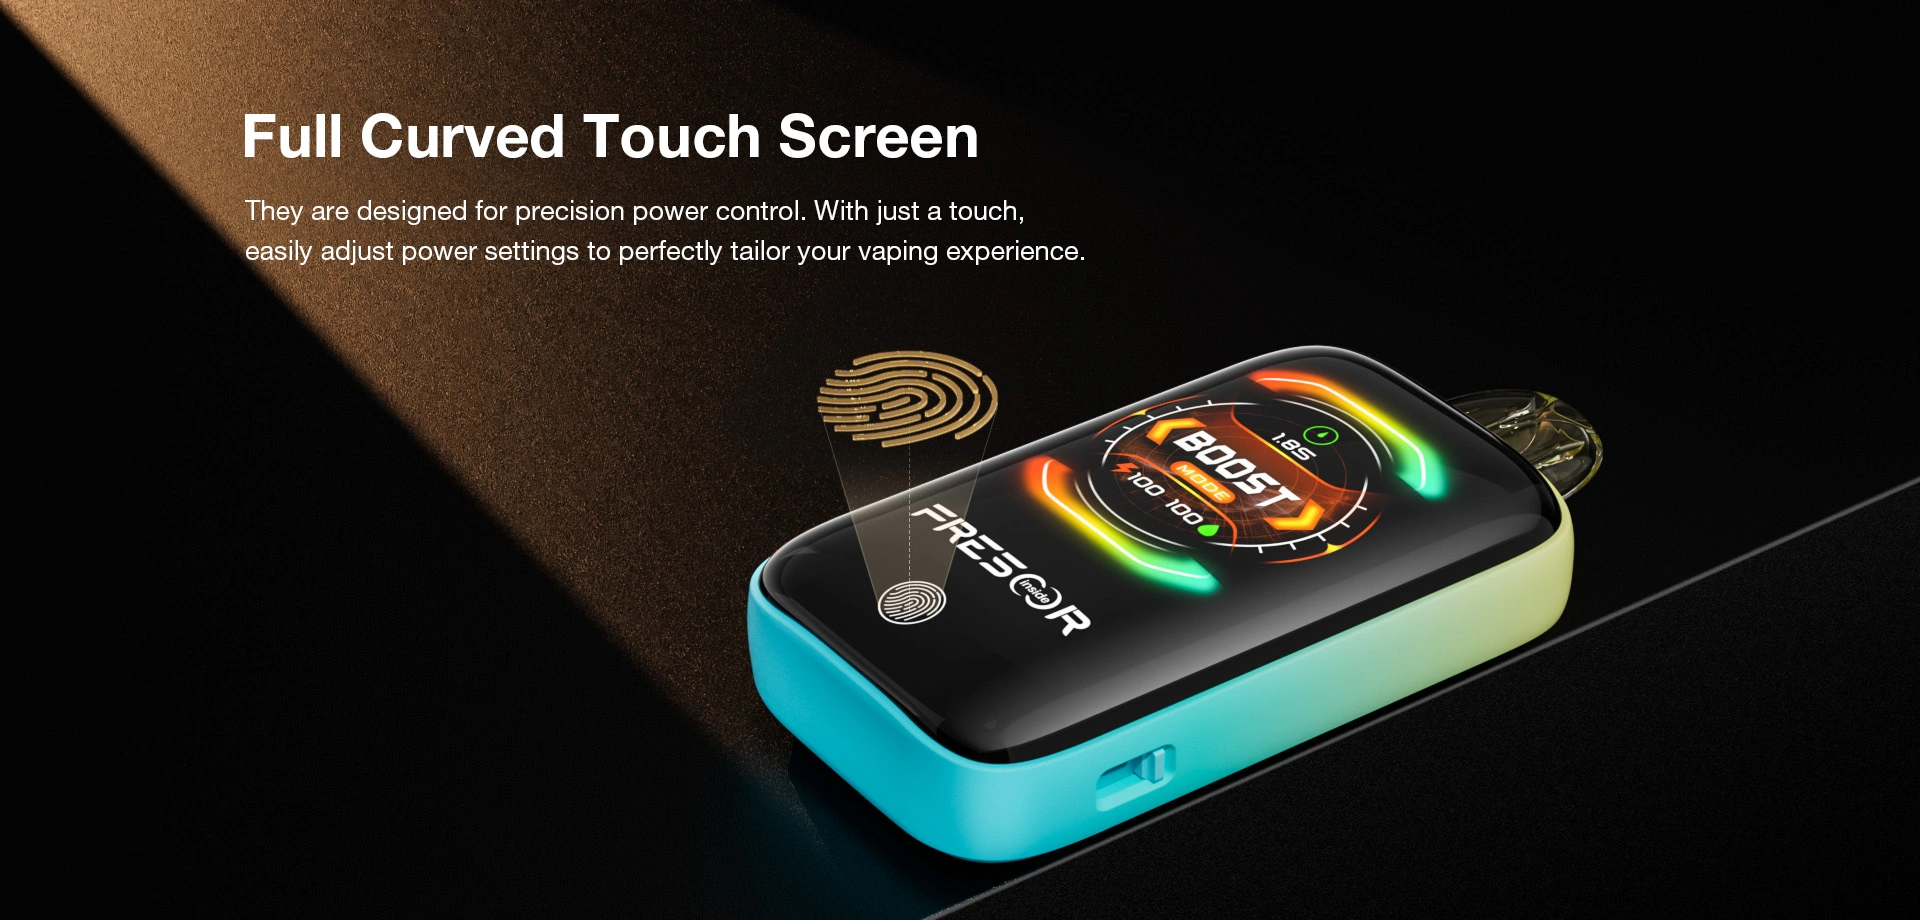 Full Curved Touch Screen  They are designed for precision power control. With just a touch, easily adjust power settings to perfectly tailor your vaping experience.